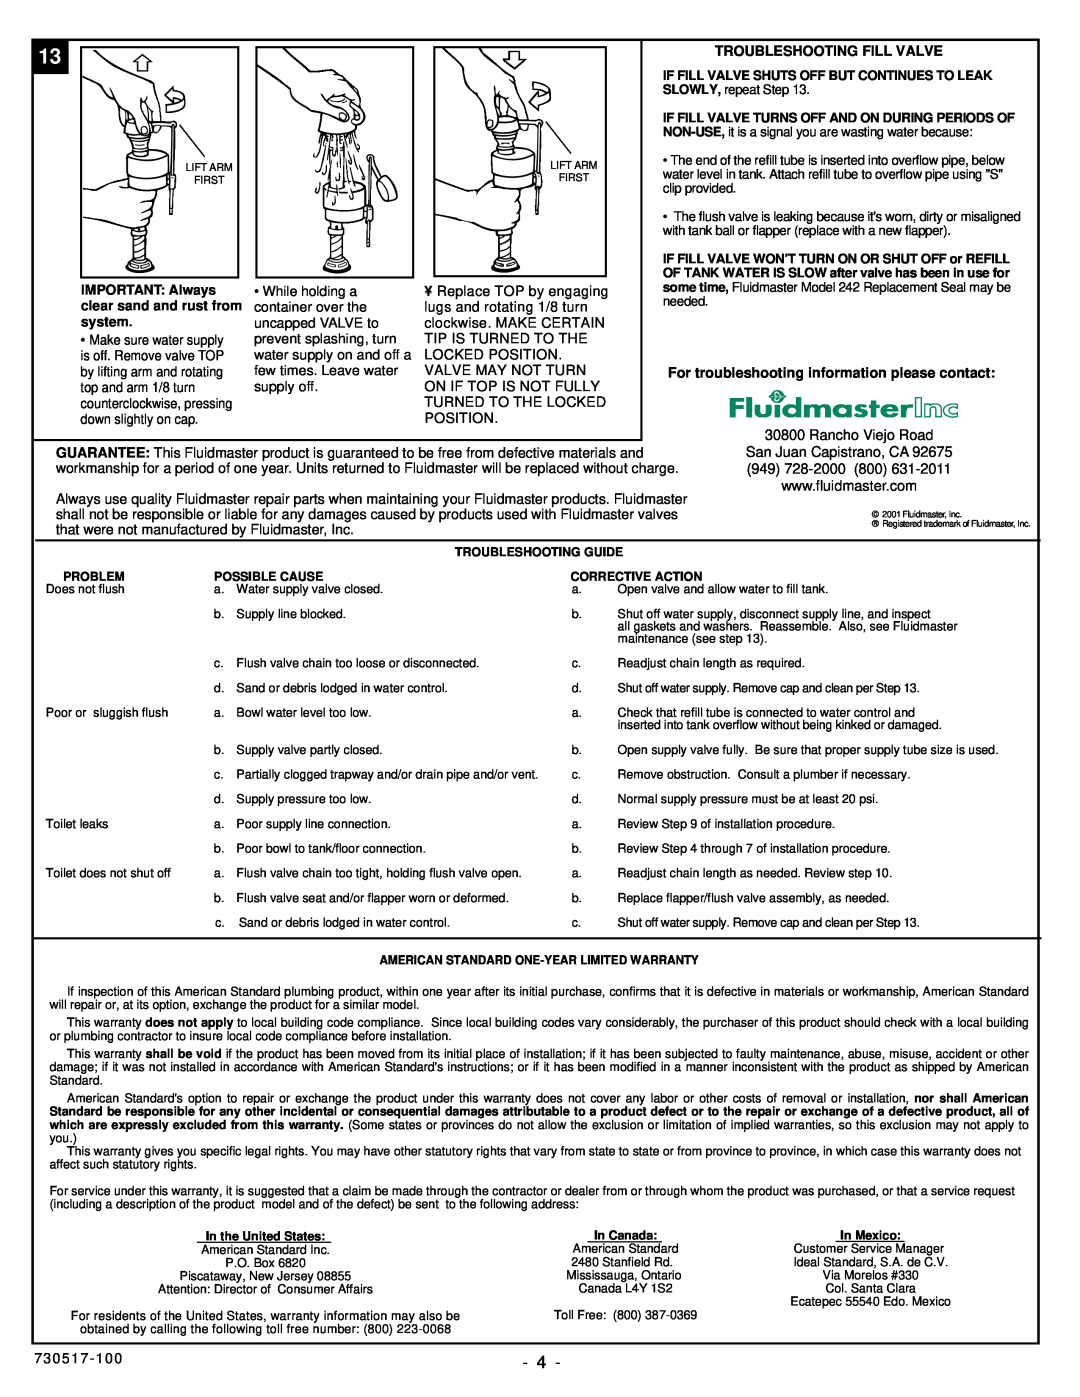 American Standard 2474 installation instructions Troubleshooting Fill Valve, For troubleshooting information please contact 